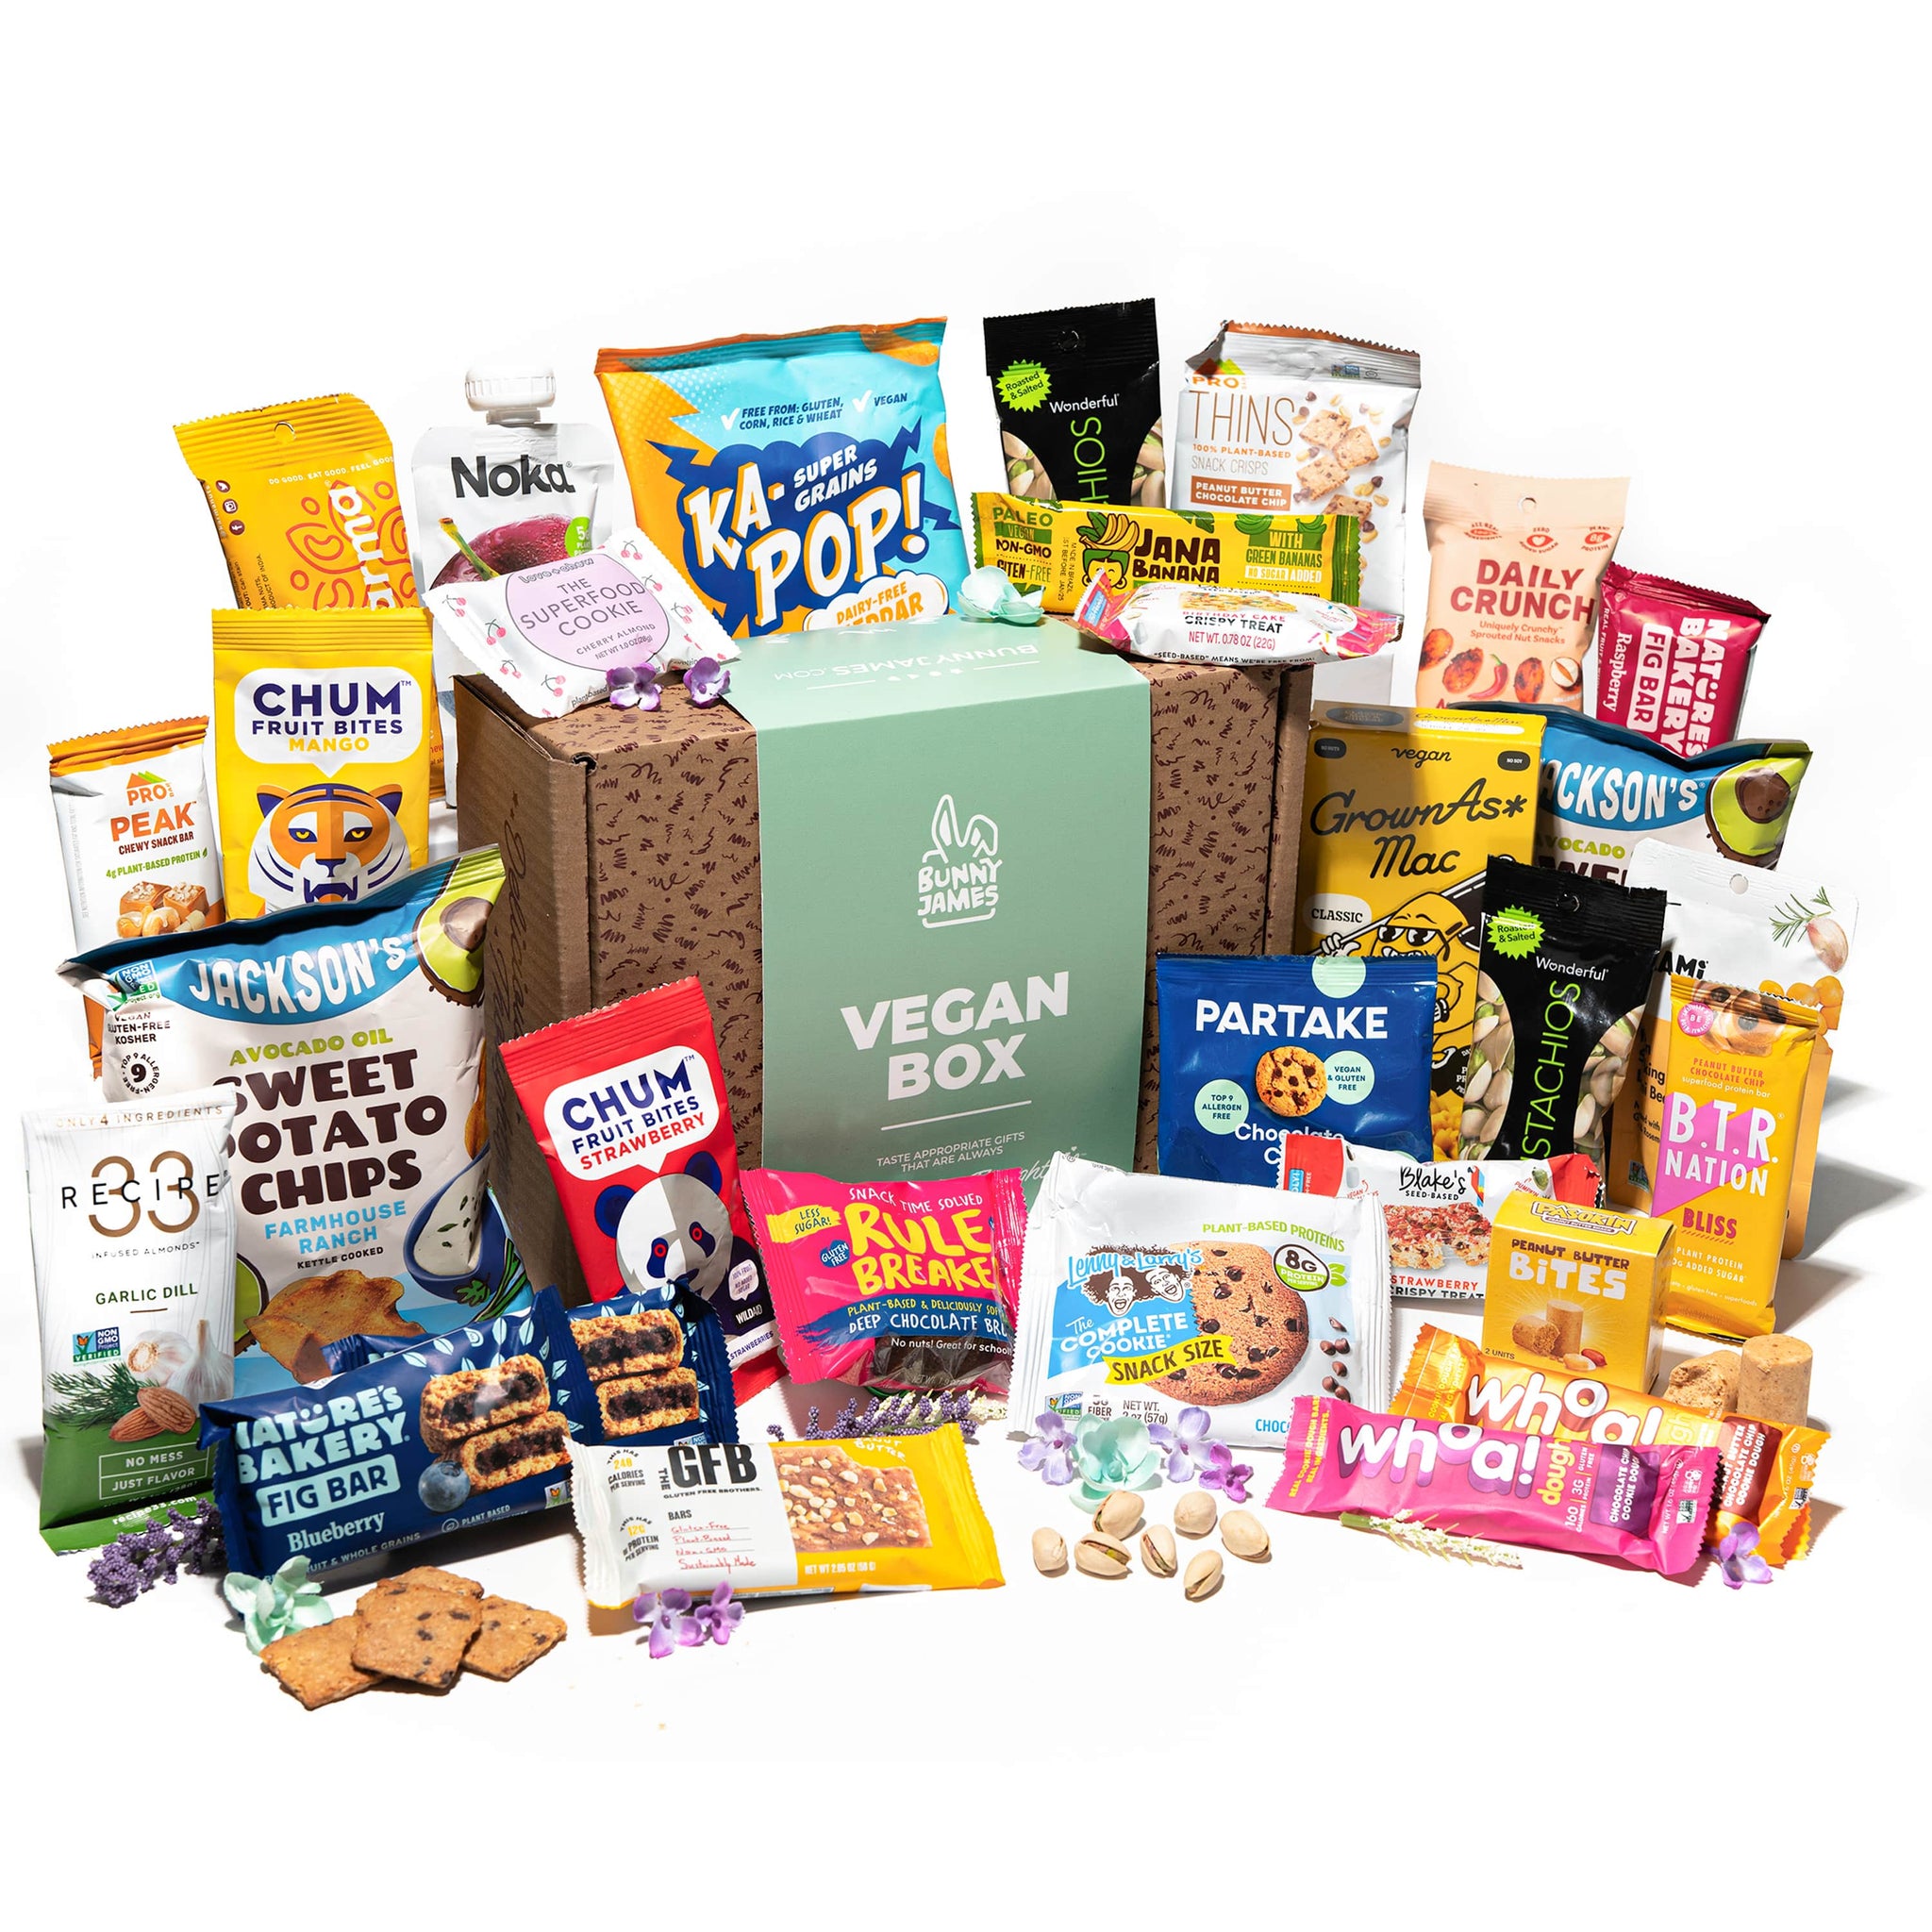 Plant-Based Father's Day Gift: Deluxe Vegan Snack Box, Cookies, Protein, Fruit, Nuts, Bars, Chips